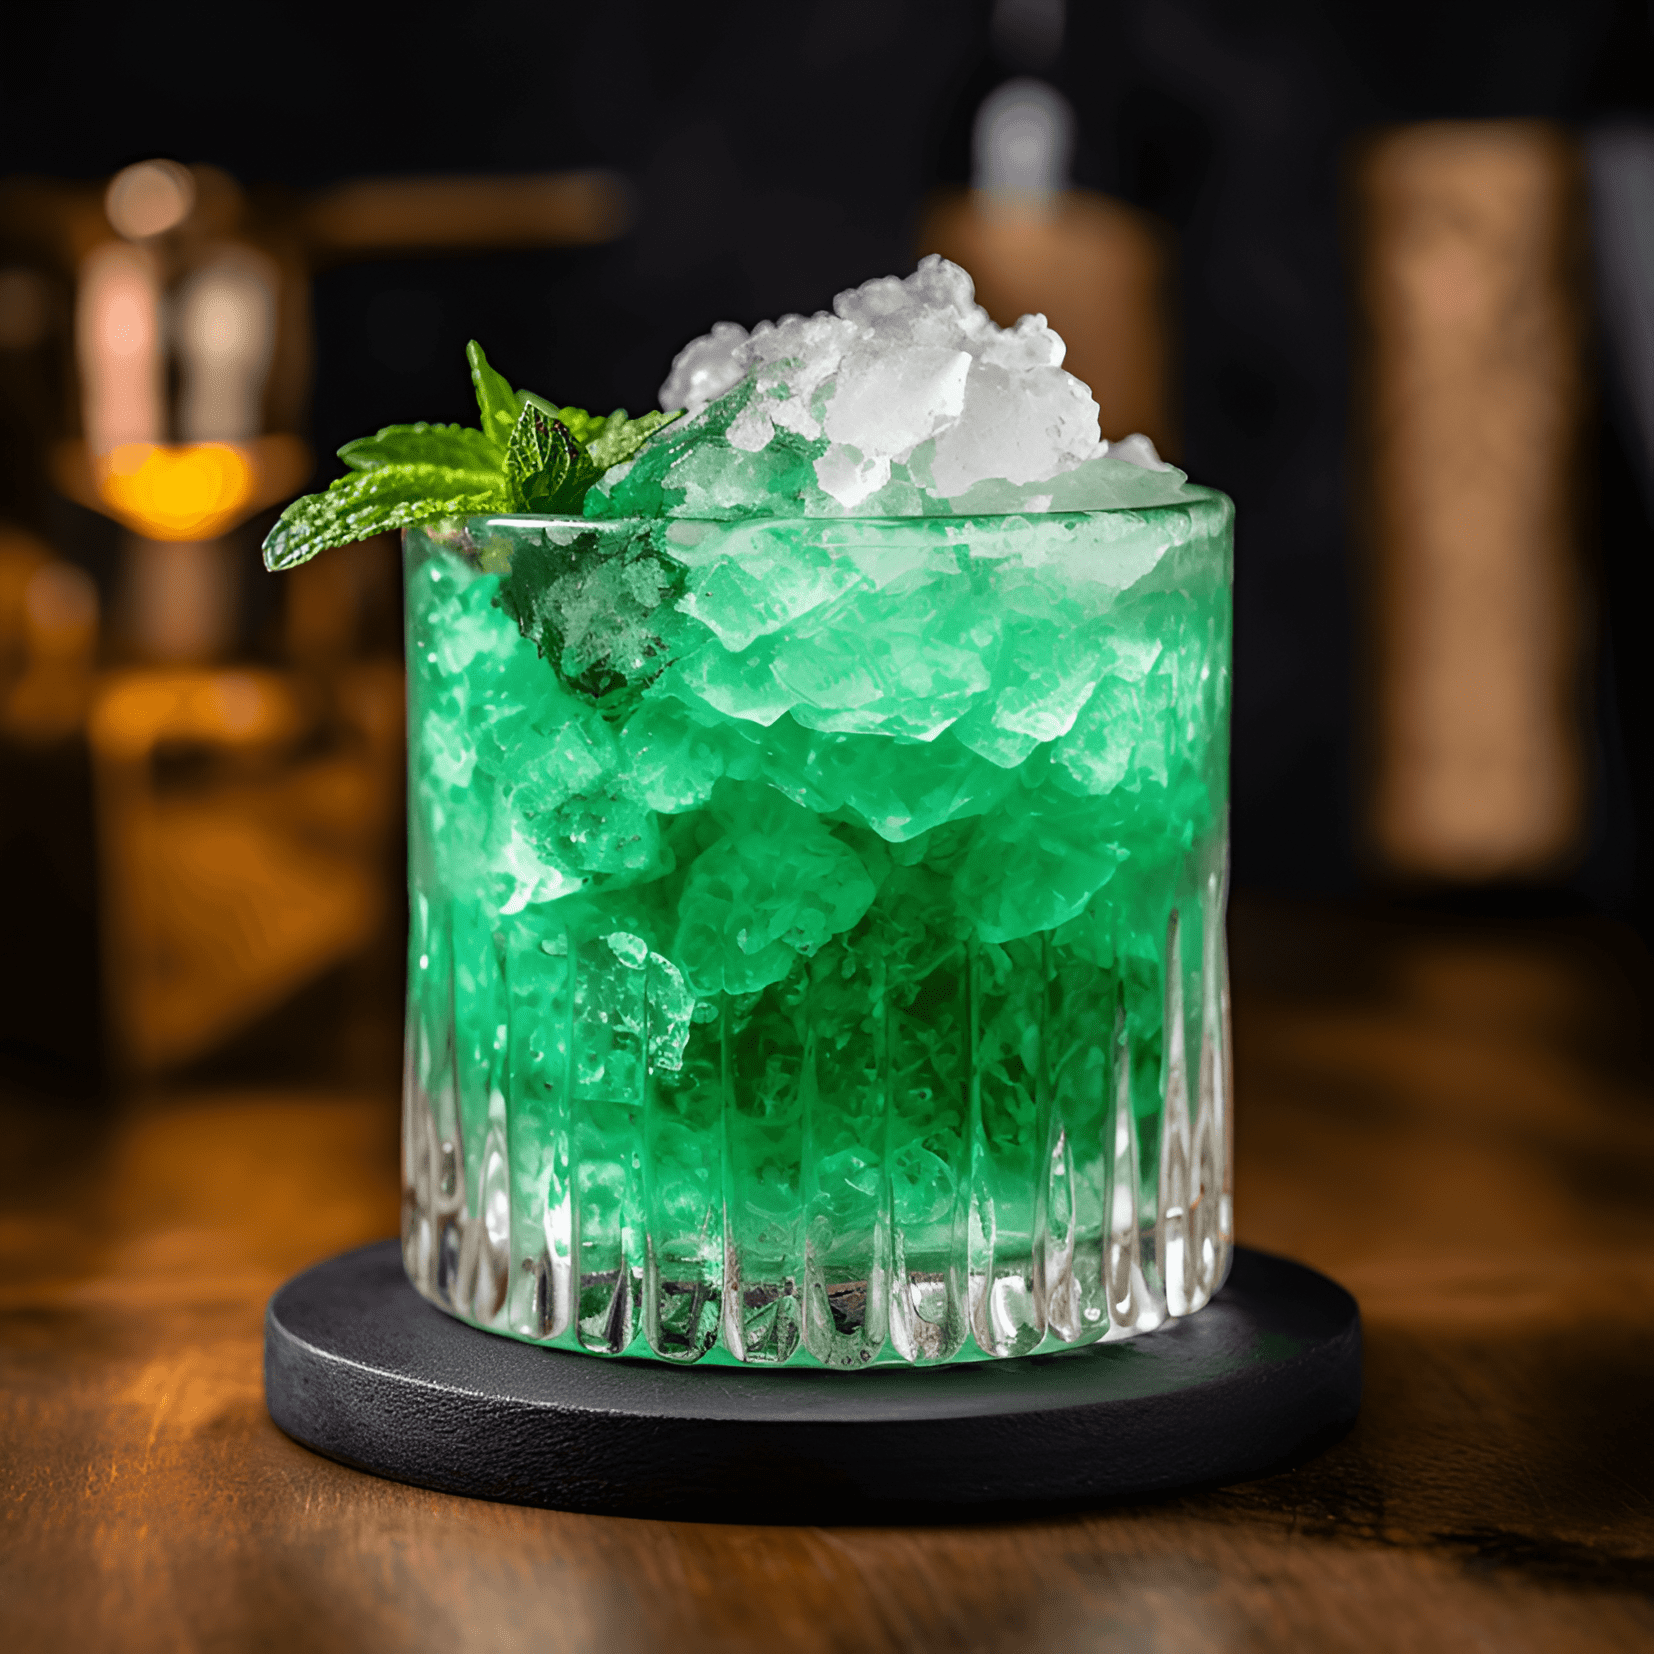 The Tequila Mockingbird is a delightful mix of sweet, sour, and slightly spicy flavors. The combination of tequila, lime juice, and green crème de menthe creates a refreshing and invigorating taste, while the jalapeño adds a subtle kick.